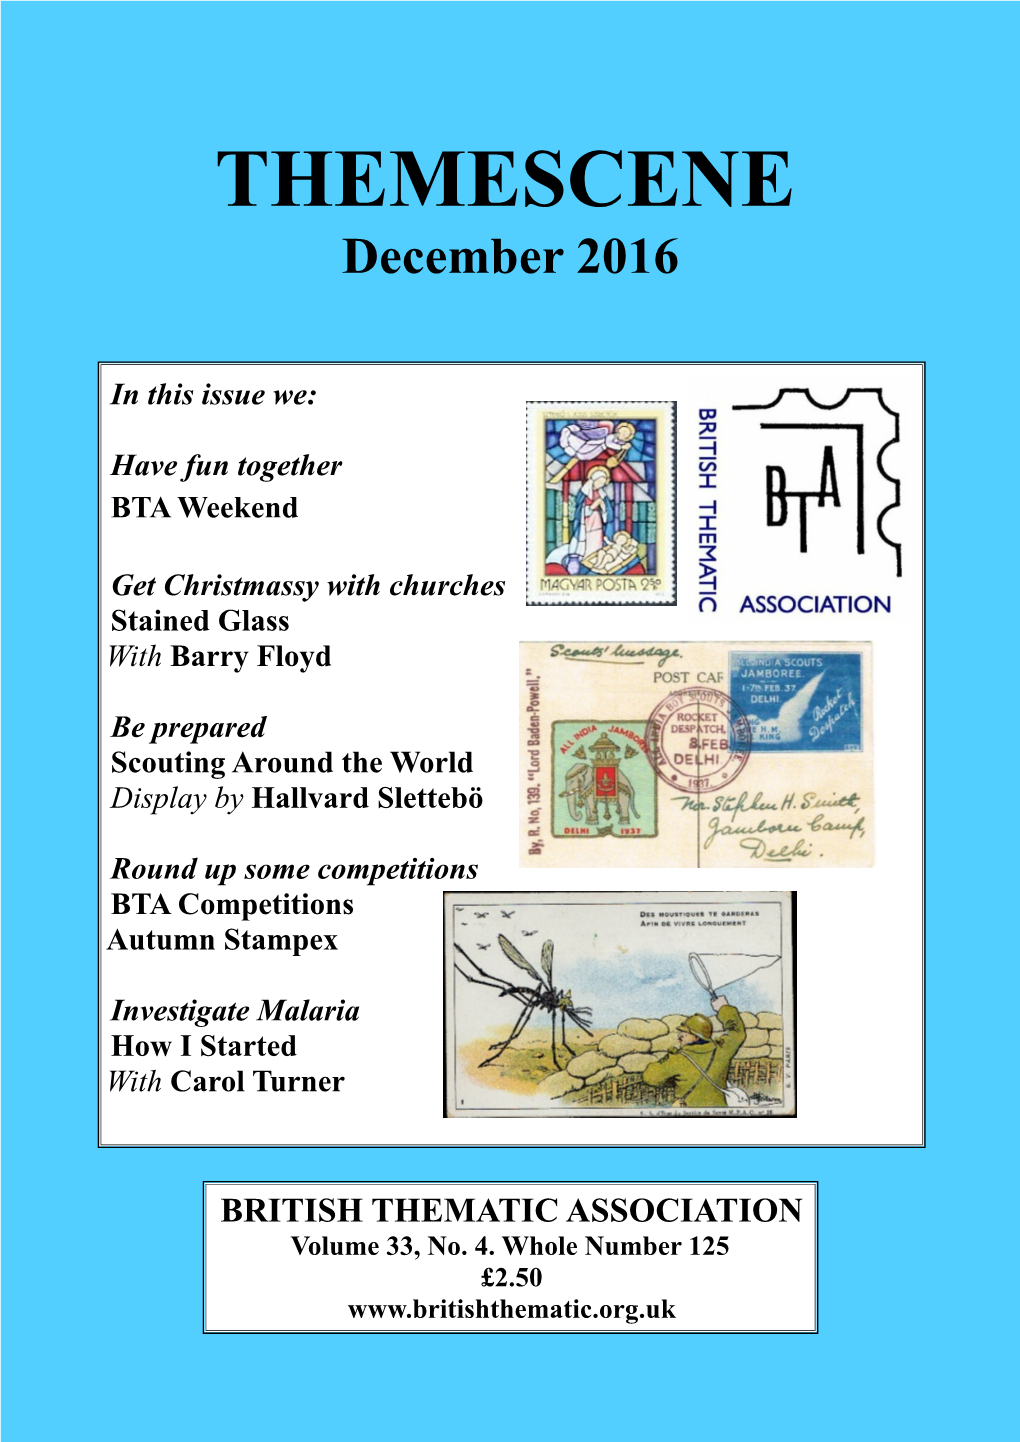 December Themescene Will Be Found a Notice Concerning the Renewal of Your Membership for the Coming Year